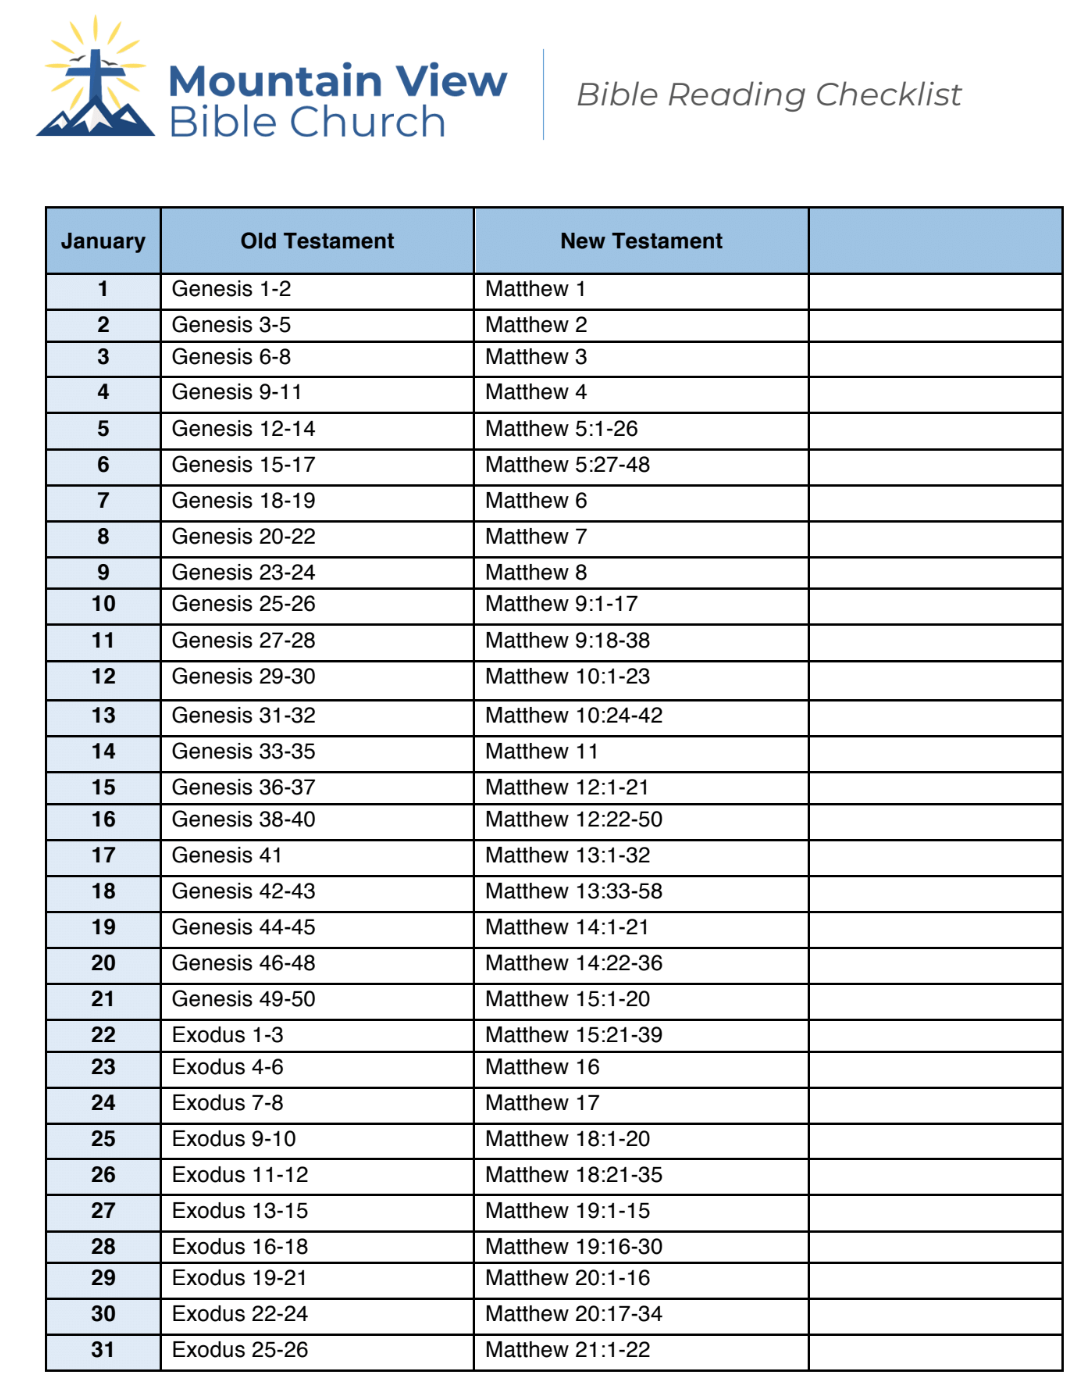 Bible Reading Checklist To Help Schedule The Whole Bible In One Year